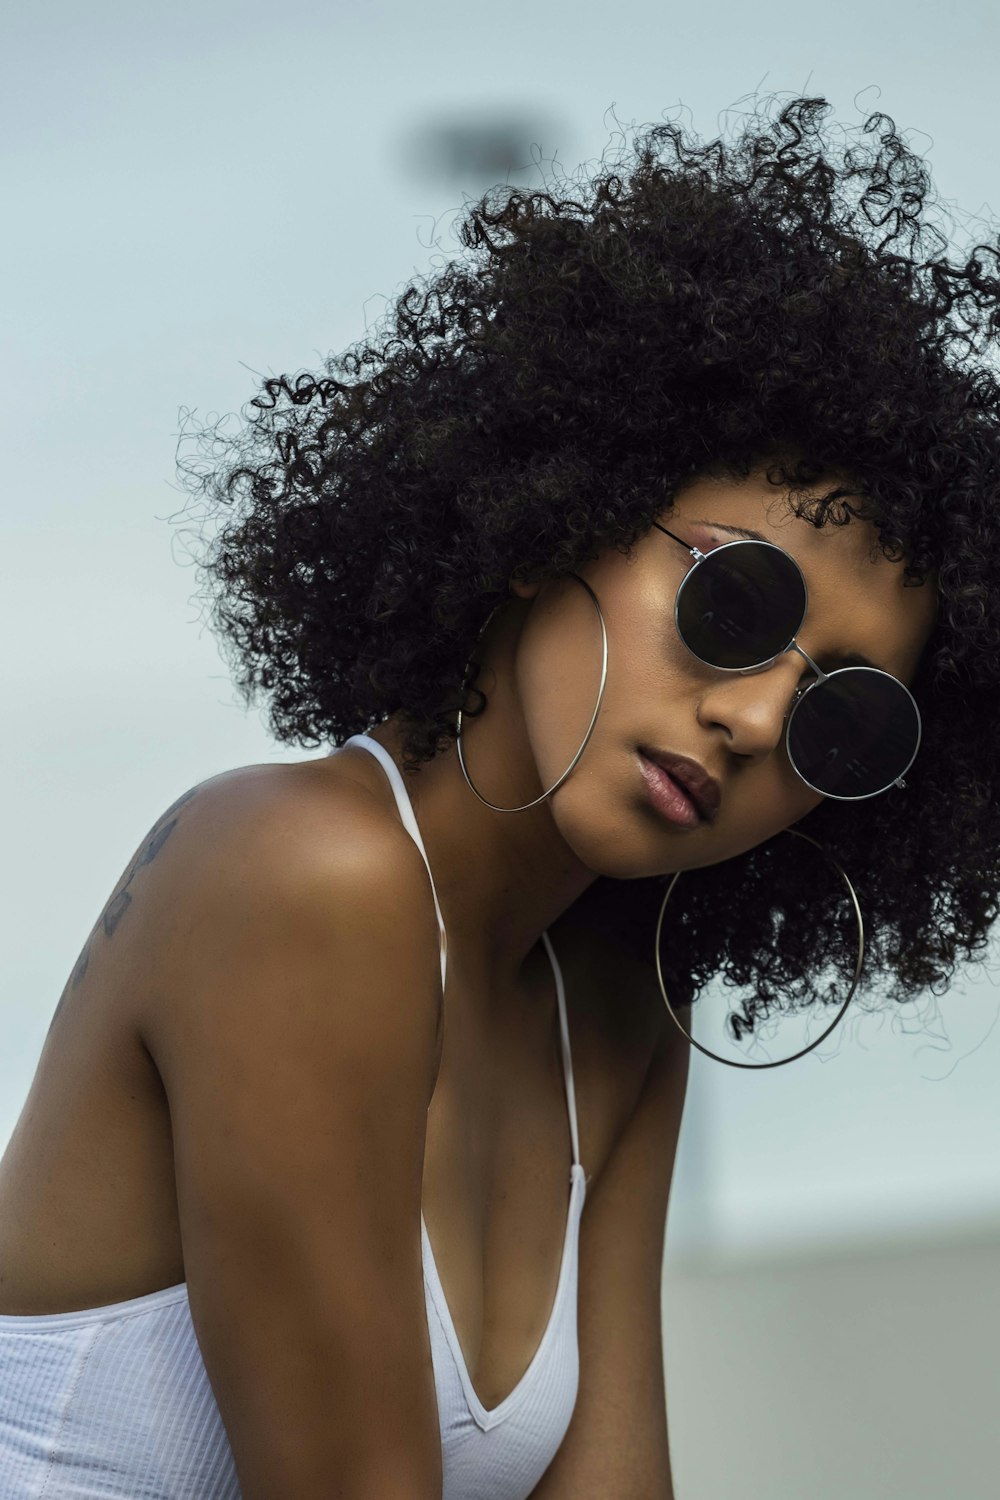 Black Teen Girl Gallery - 1500+ Beautiful Black Woman Pictures | Download Free Images on Unsplash